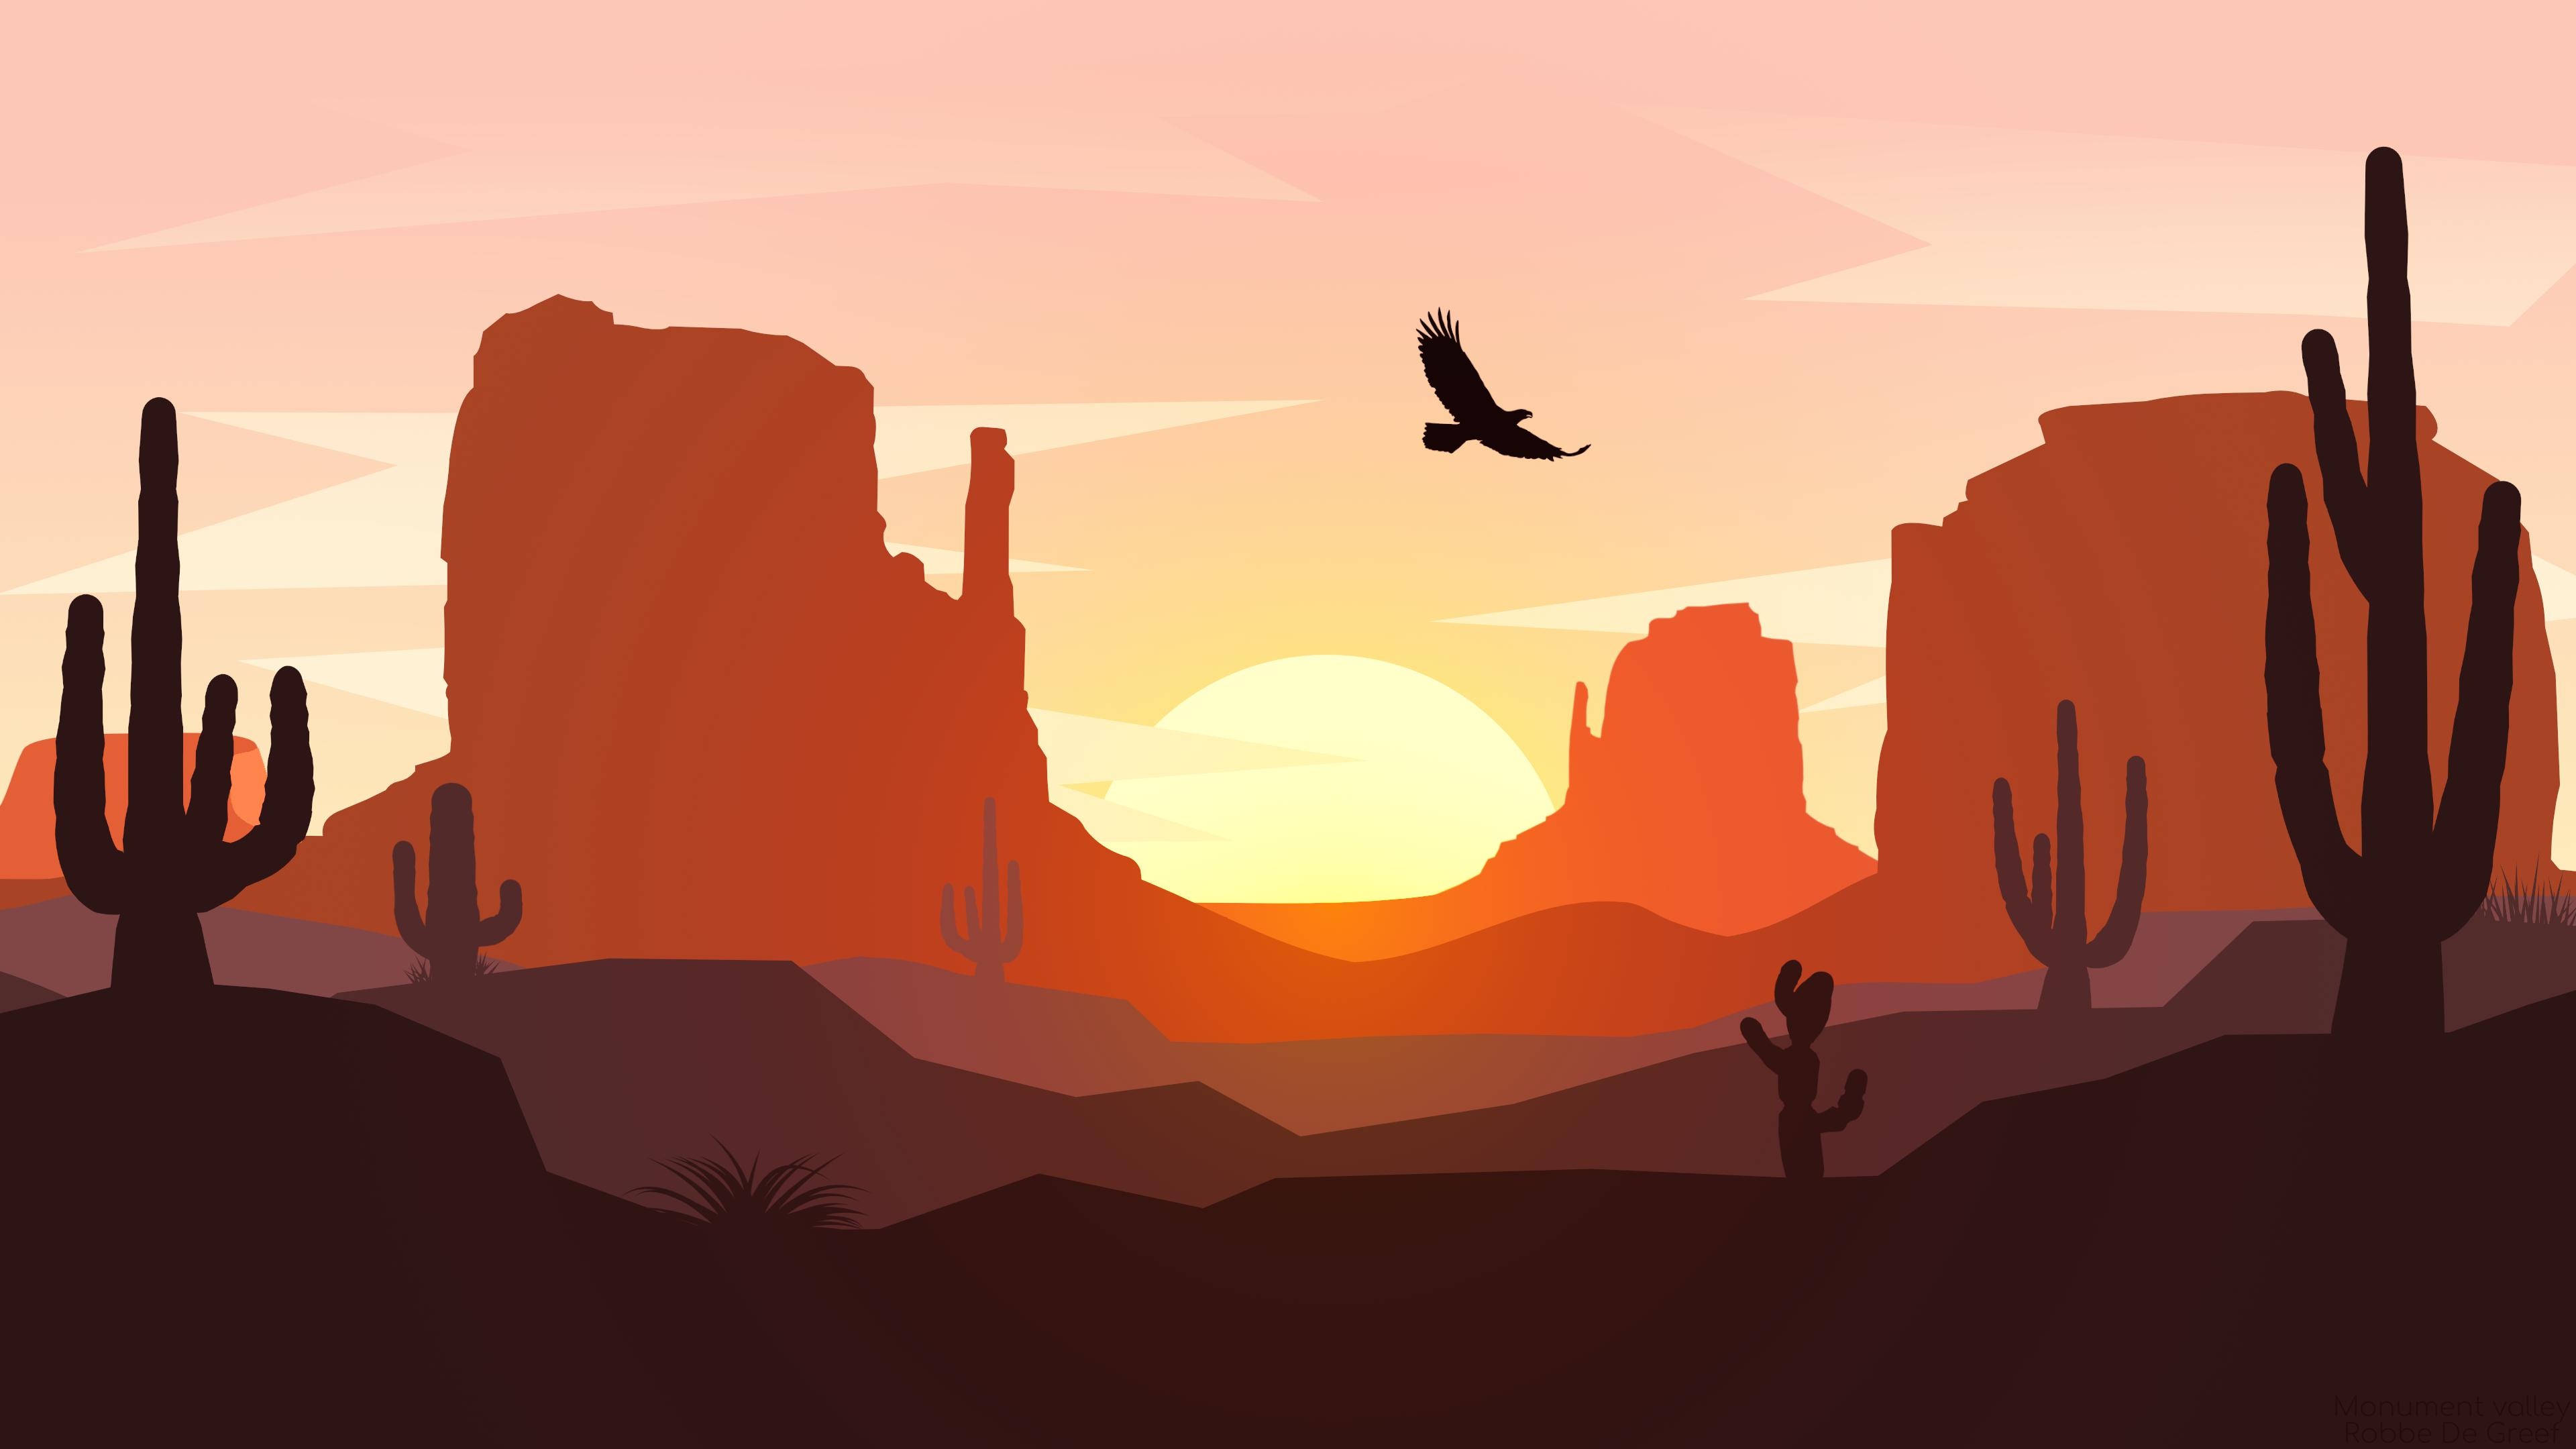 Monument Valley sunset wallpapers, Top free backgrounds, Breathtaking landscapes, Nature's masterpiece, 3840x2160 4K Desktop